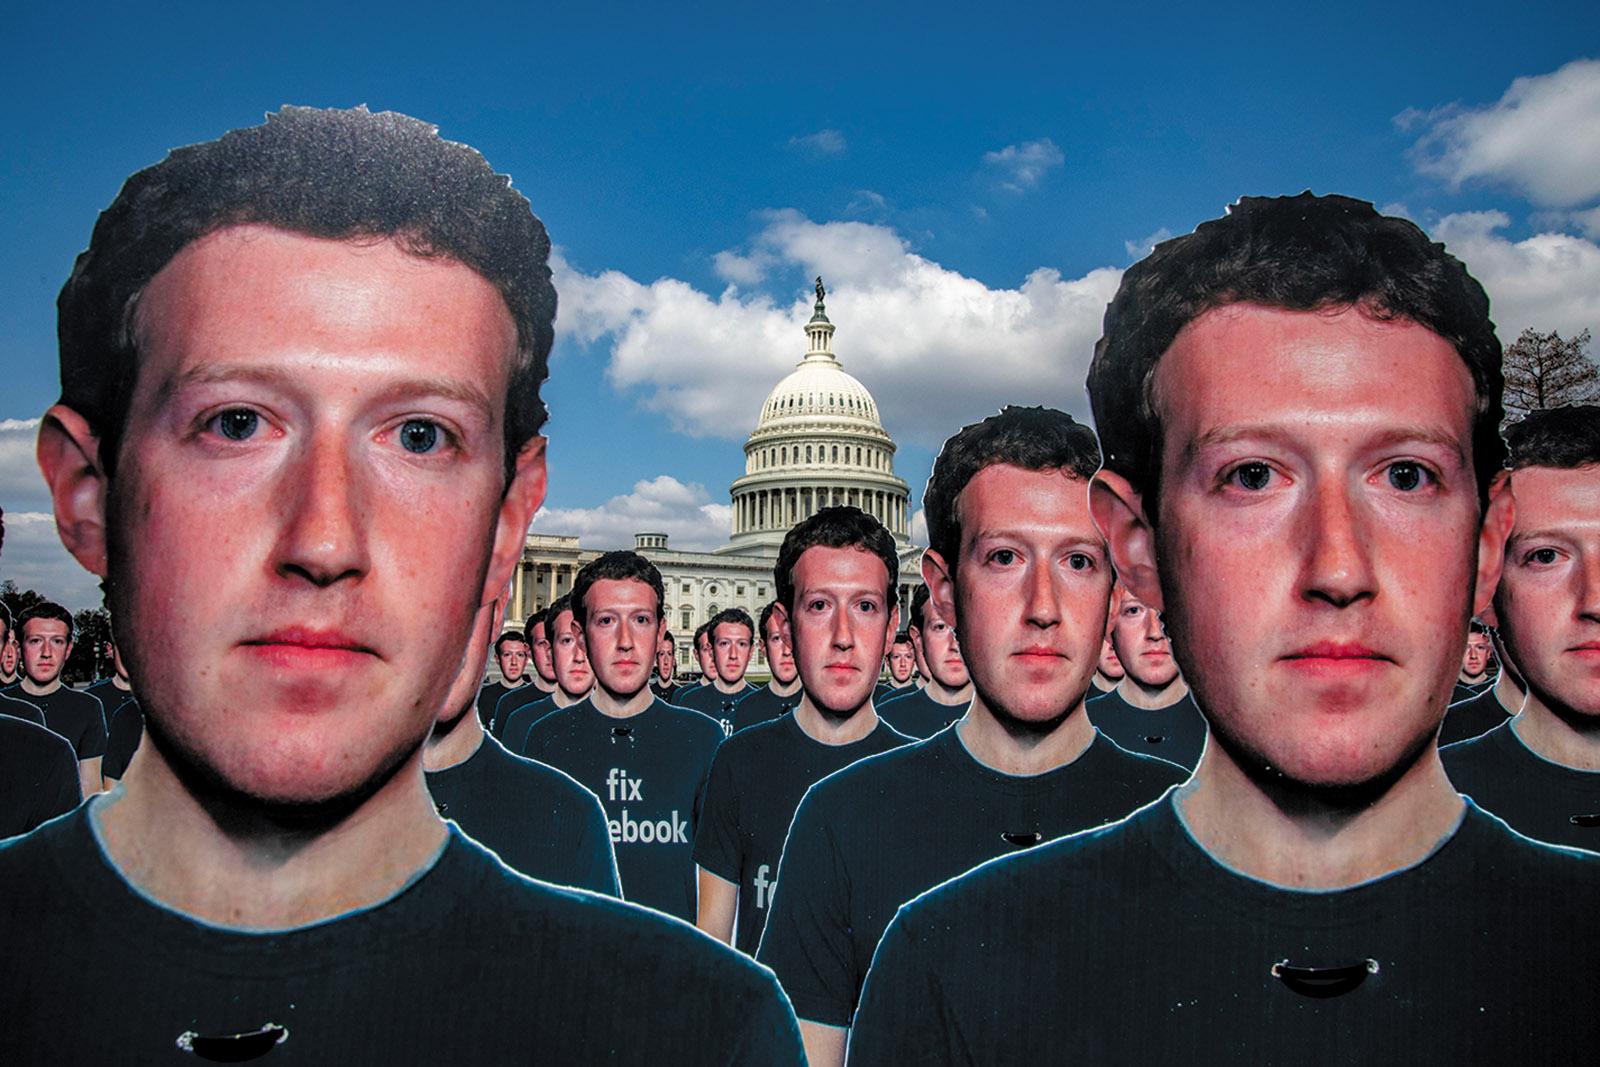 Cardboard cutouts of Mark Zuckerberg placed outside the Capitol to protest the spread of disinformation on Facebook, Washington, D.C., April 2018